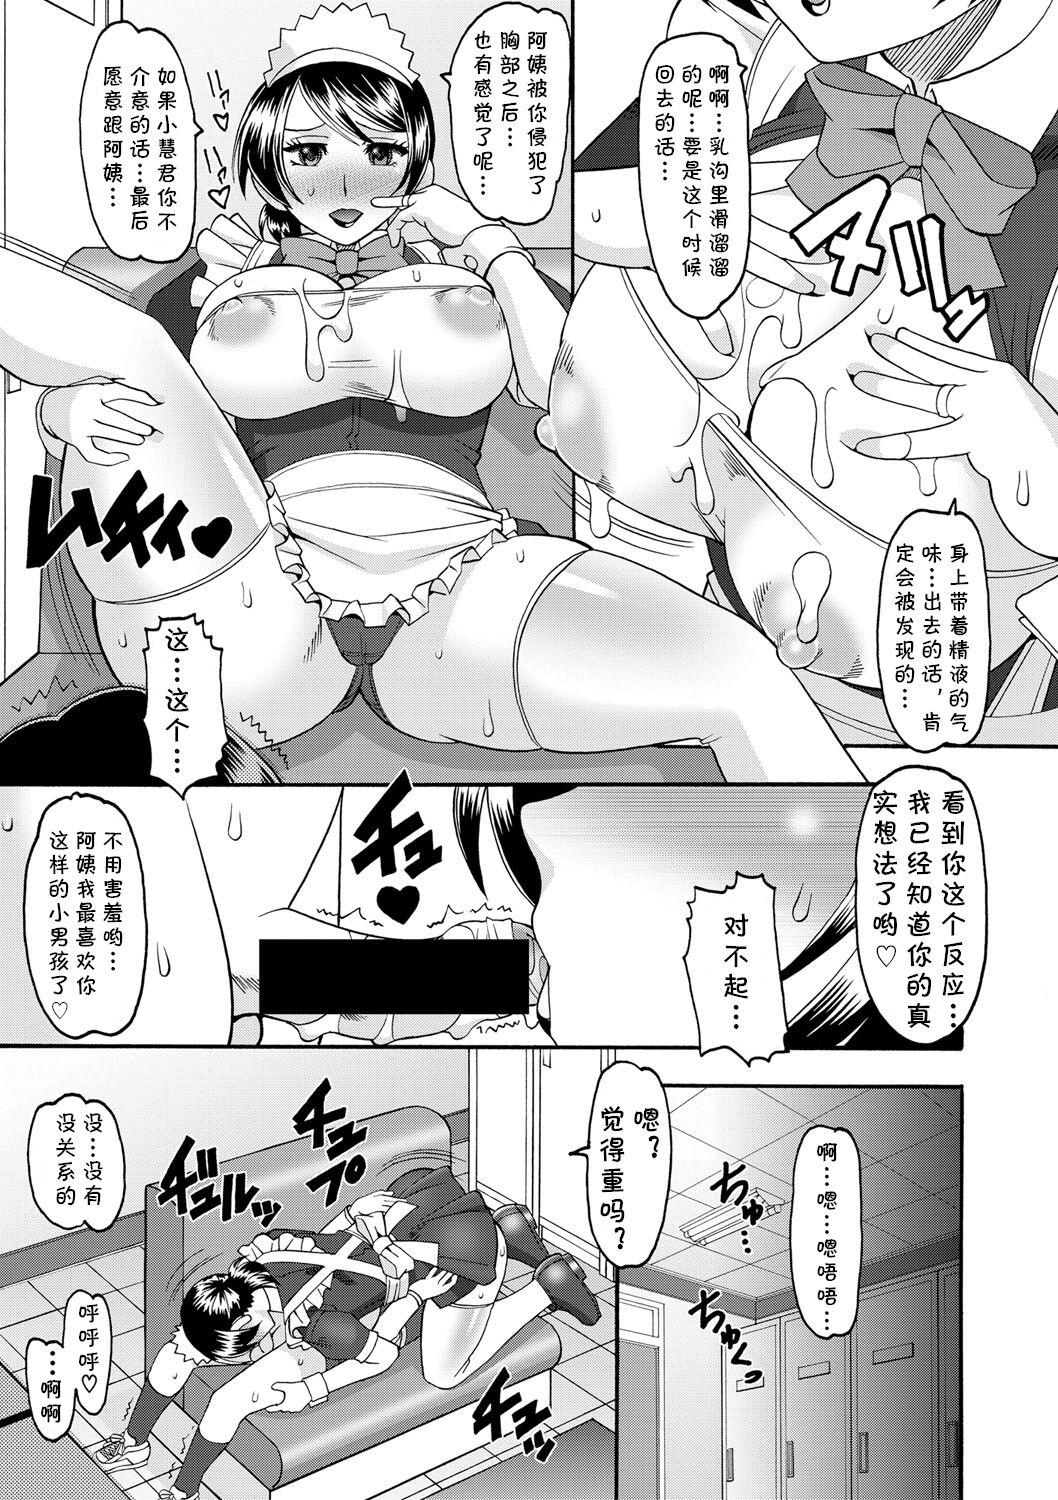 Maid-san OVER 30 Part 1 10